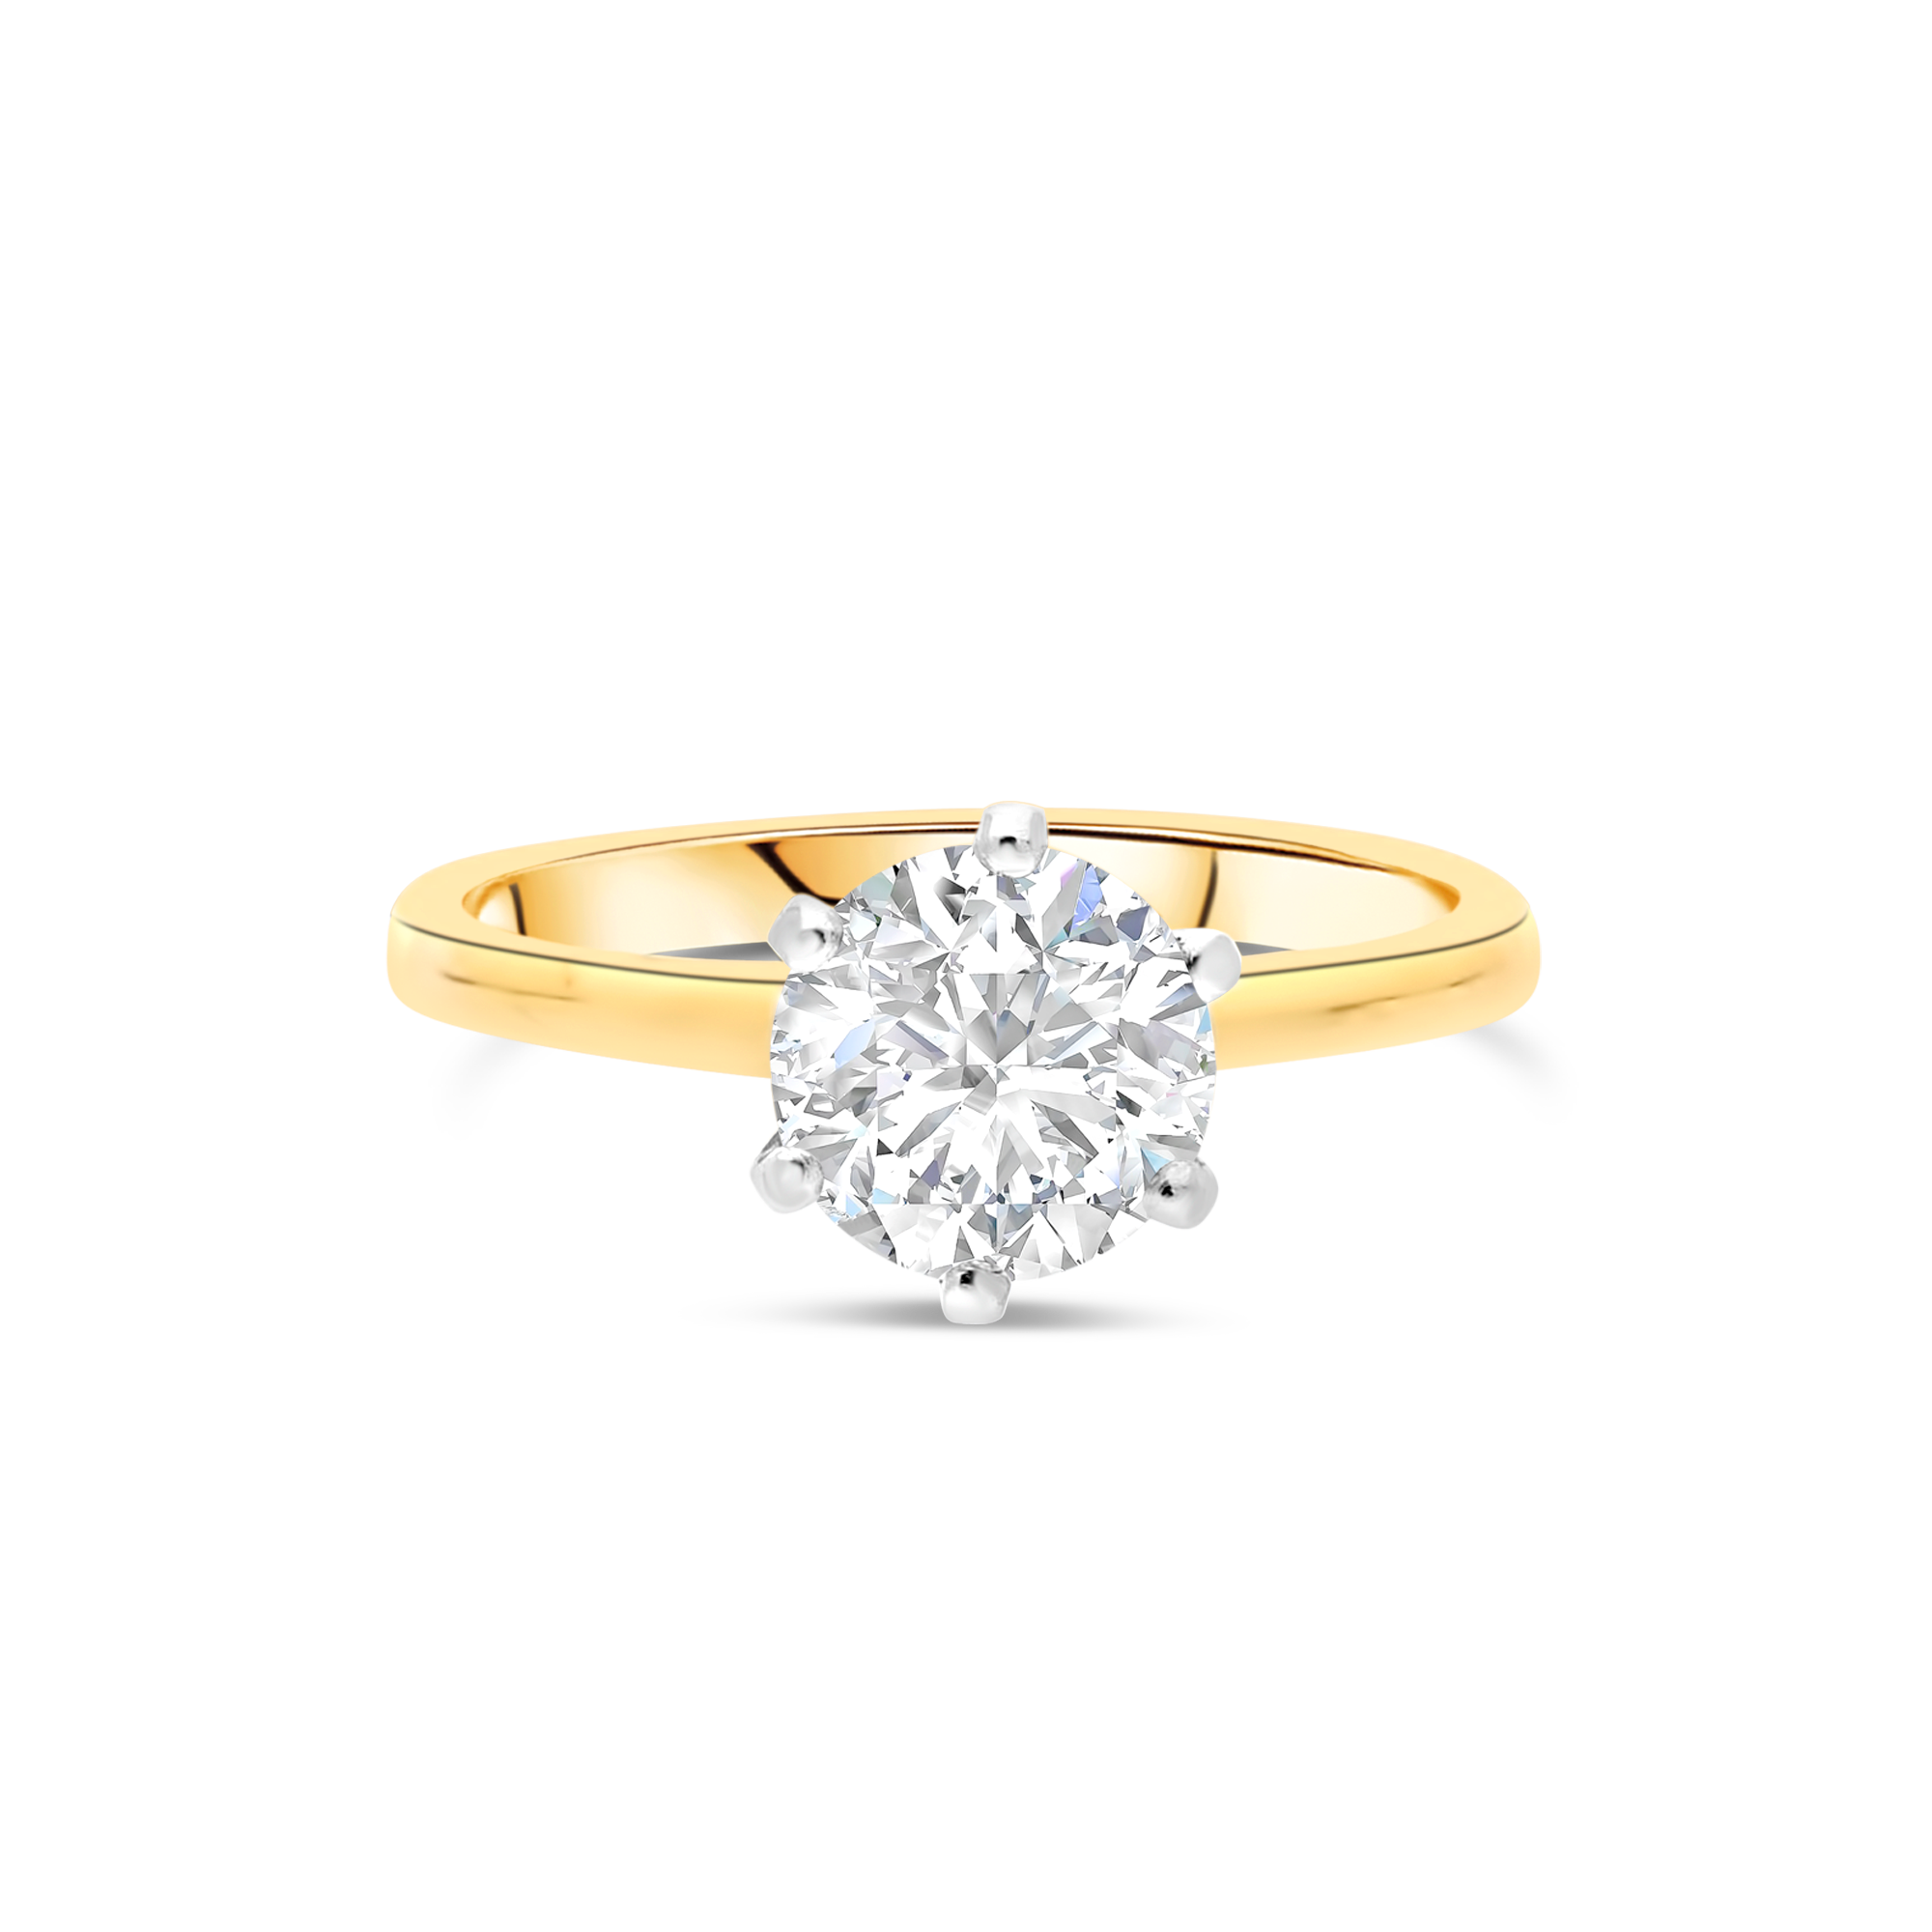 The "Romance" Solitaire, Yellow Gold